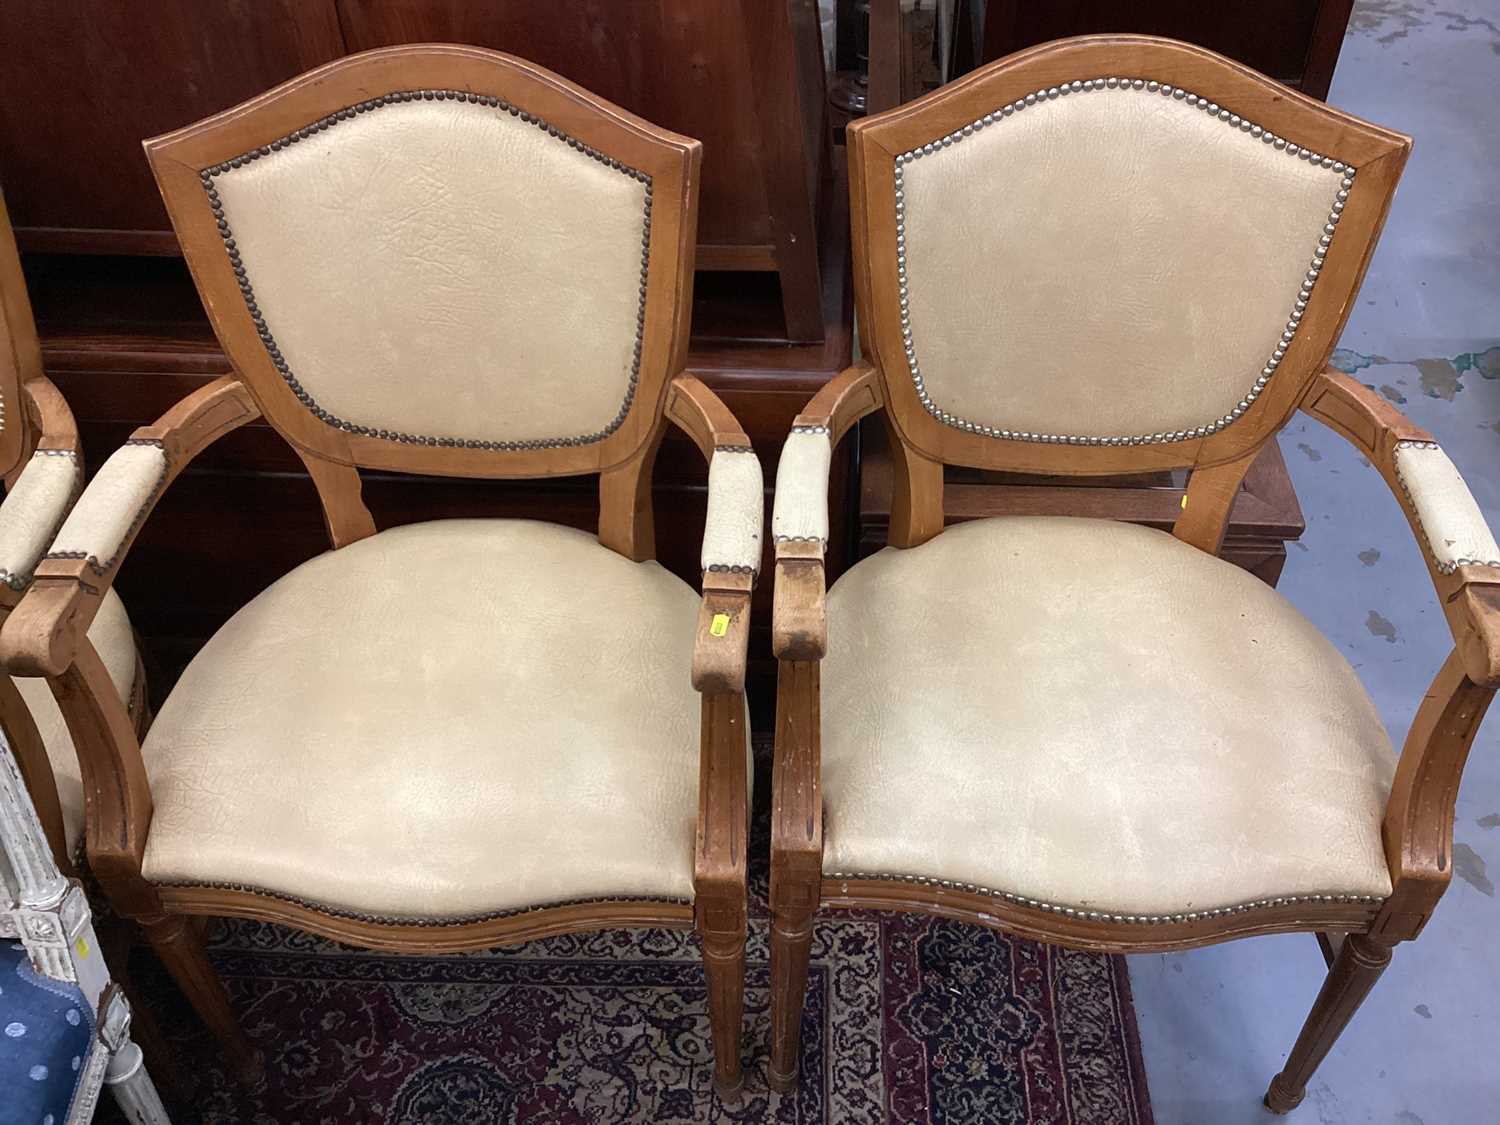 Set of four French style elbow chairs with studded beige upholstery